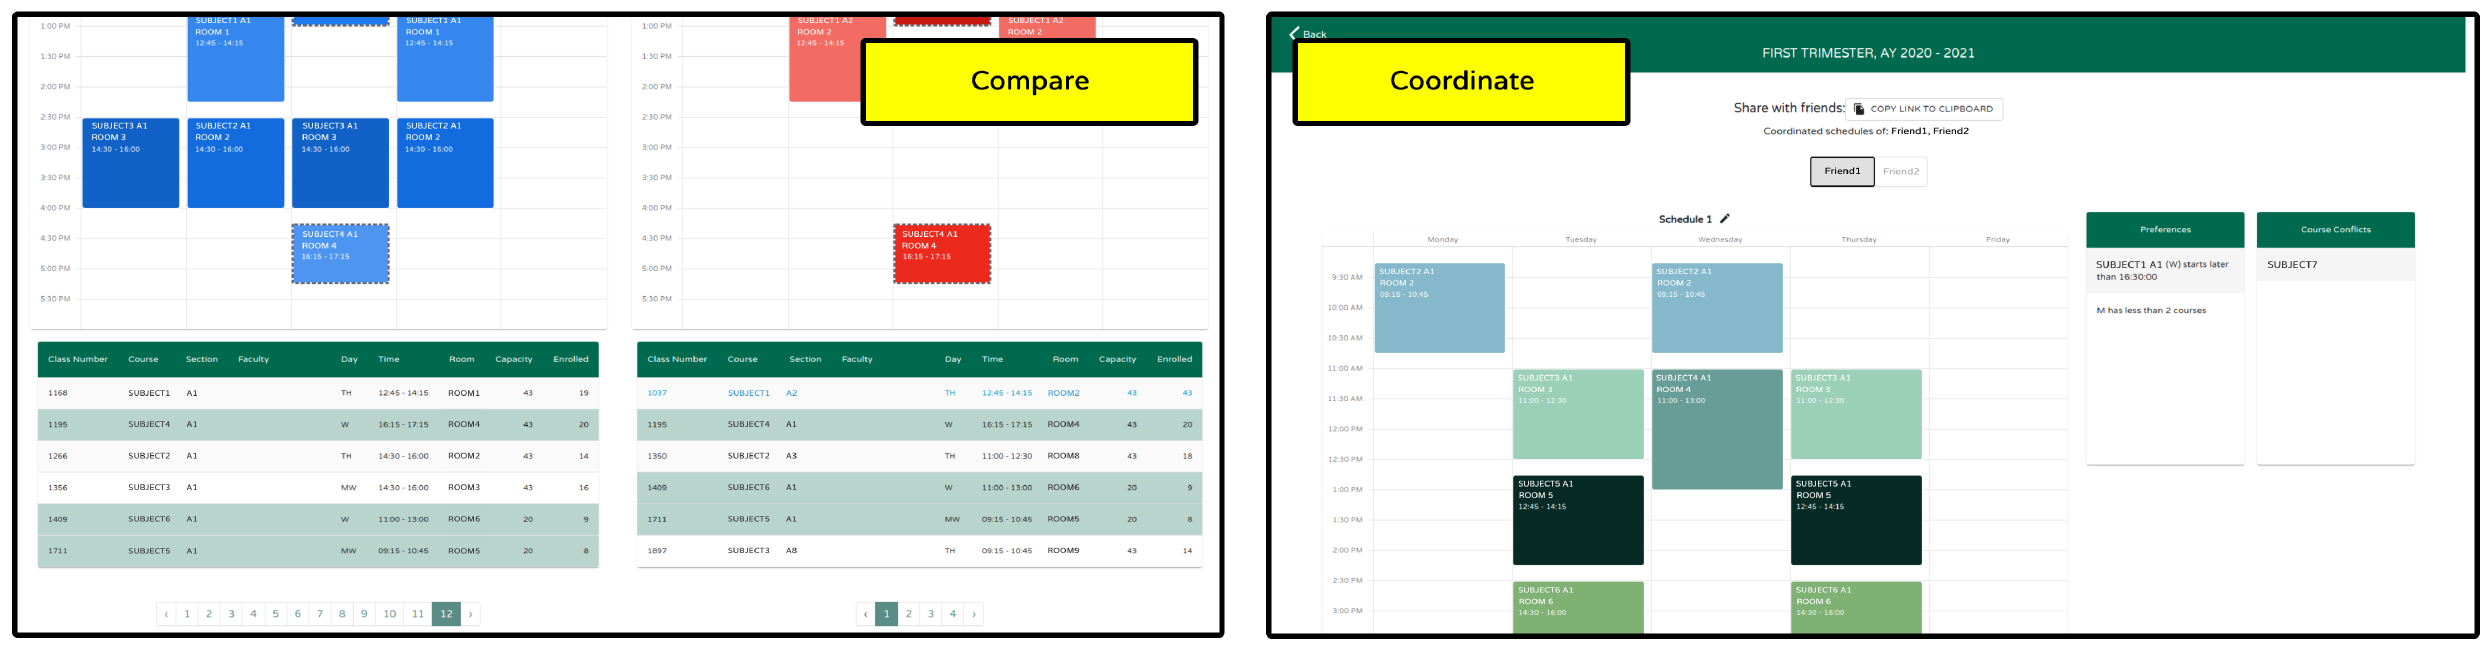 Two interfaces of the prototype. The interface on the left allows users to compare schedules with other students while the one on the right allows the collaborative creation of schedule with friends.